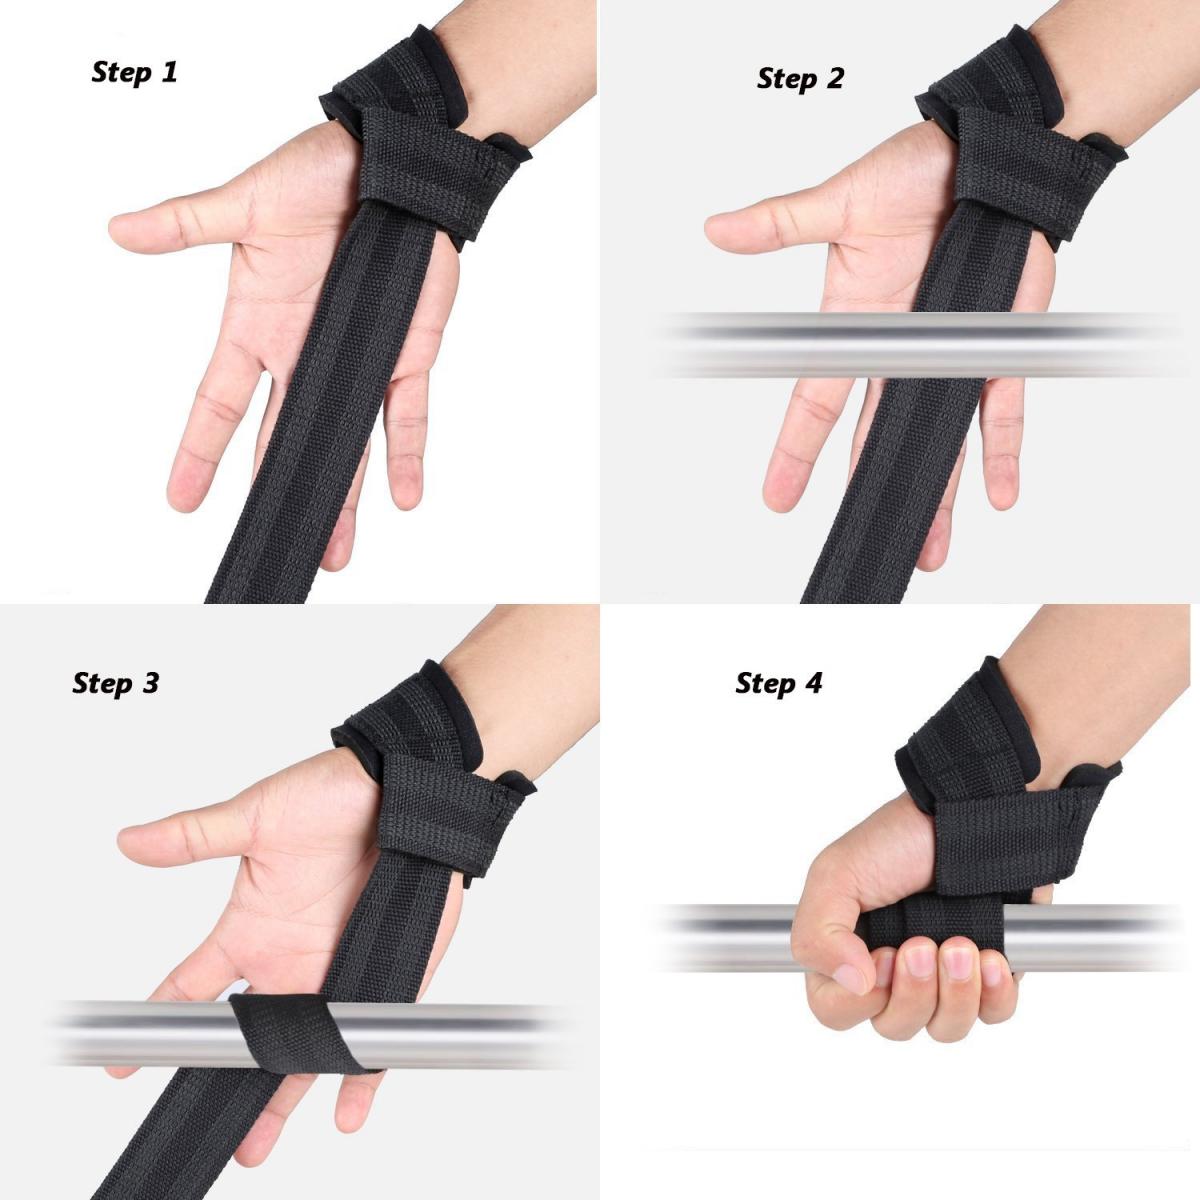 Lifting Straps, Wrist Straps Power Hand Bar Straps Gym Neoprene Padded  Anti-Slip to Strengthen Grip for Weightlifting, Powerlifting,Bodybuilding,Strength  Training,Dead Lifting - Men and Women - KENTFAITH